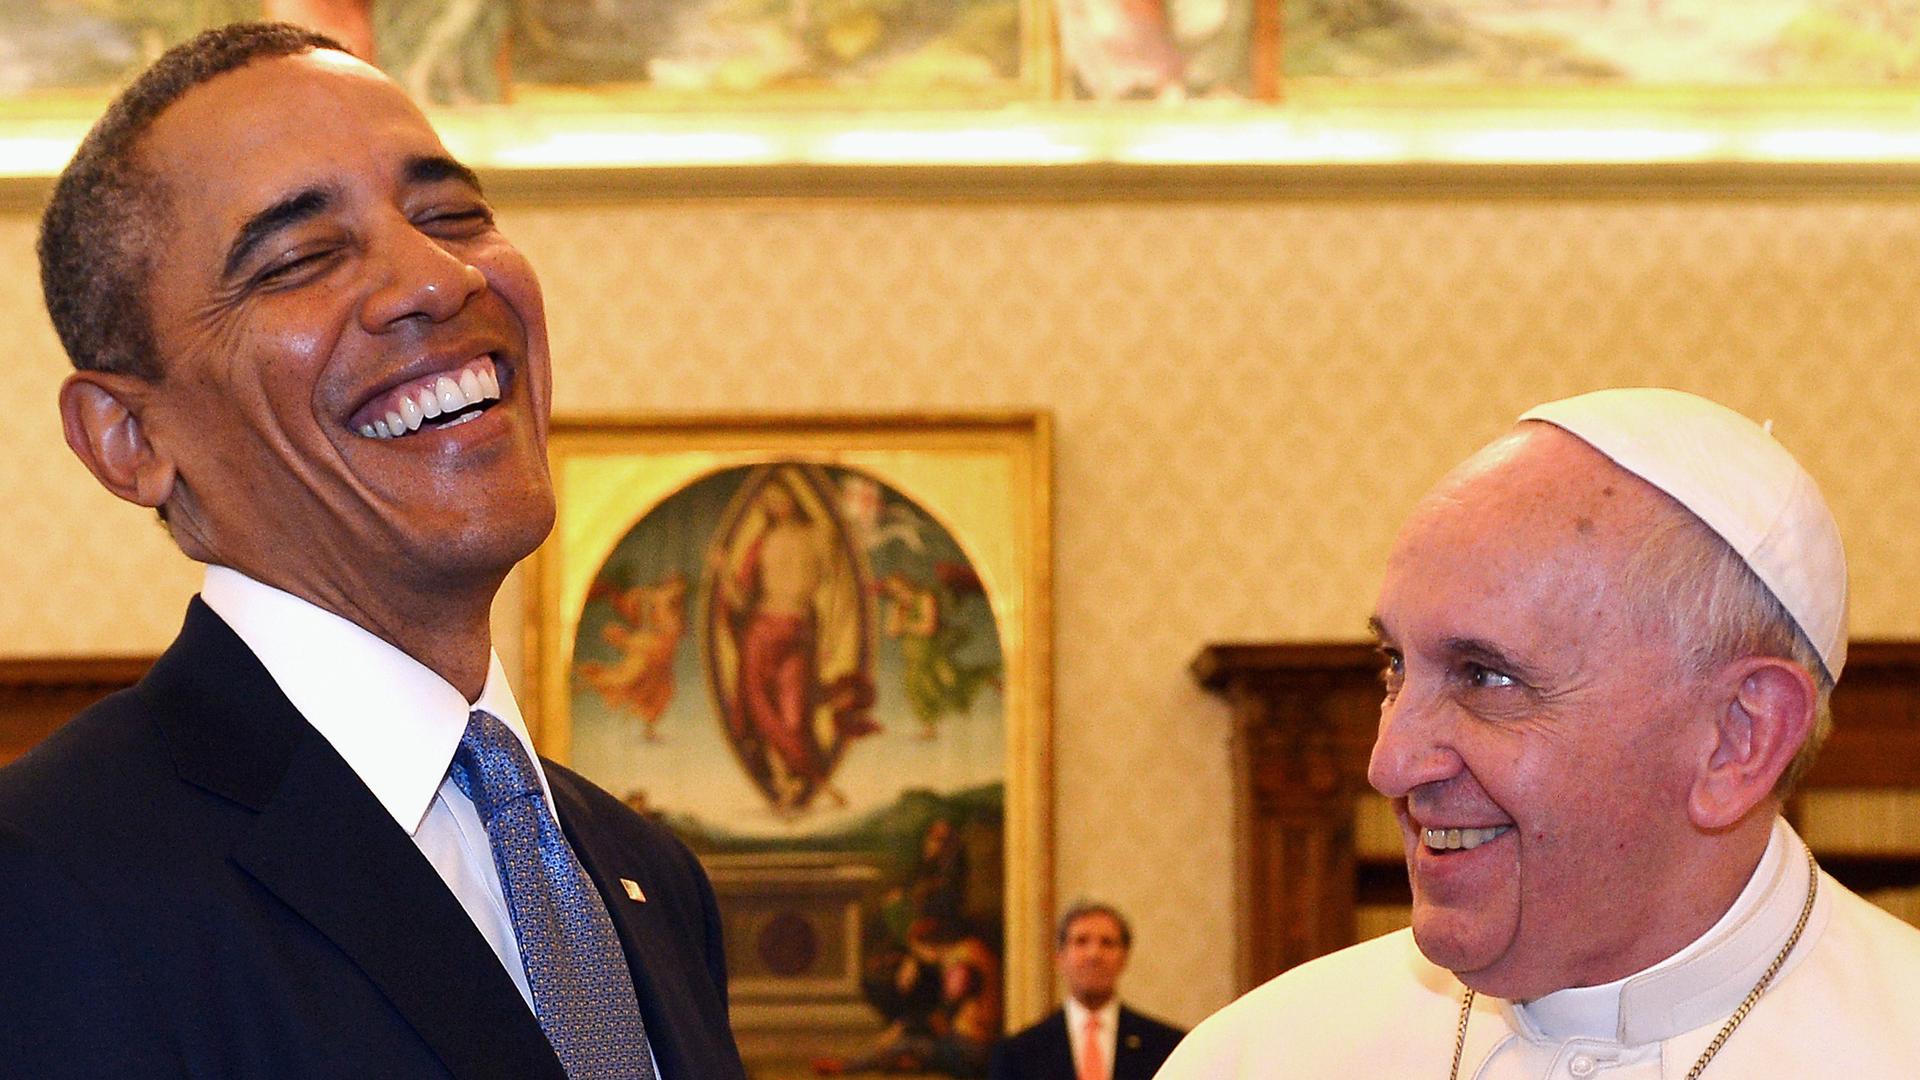 Pope Francis and President Barack Obama enjoying each other's company during their meeting Thursday in the Vatican.